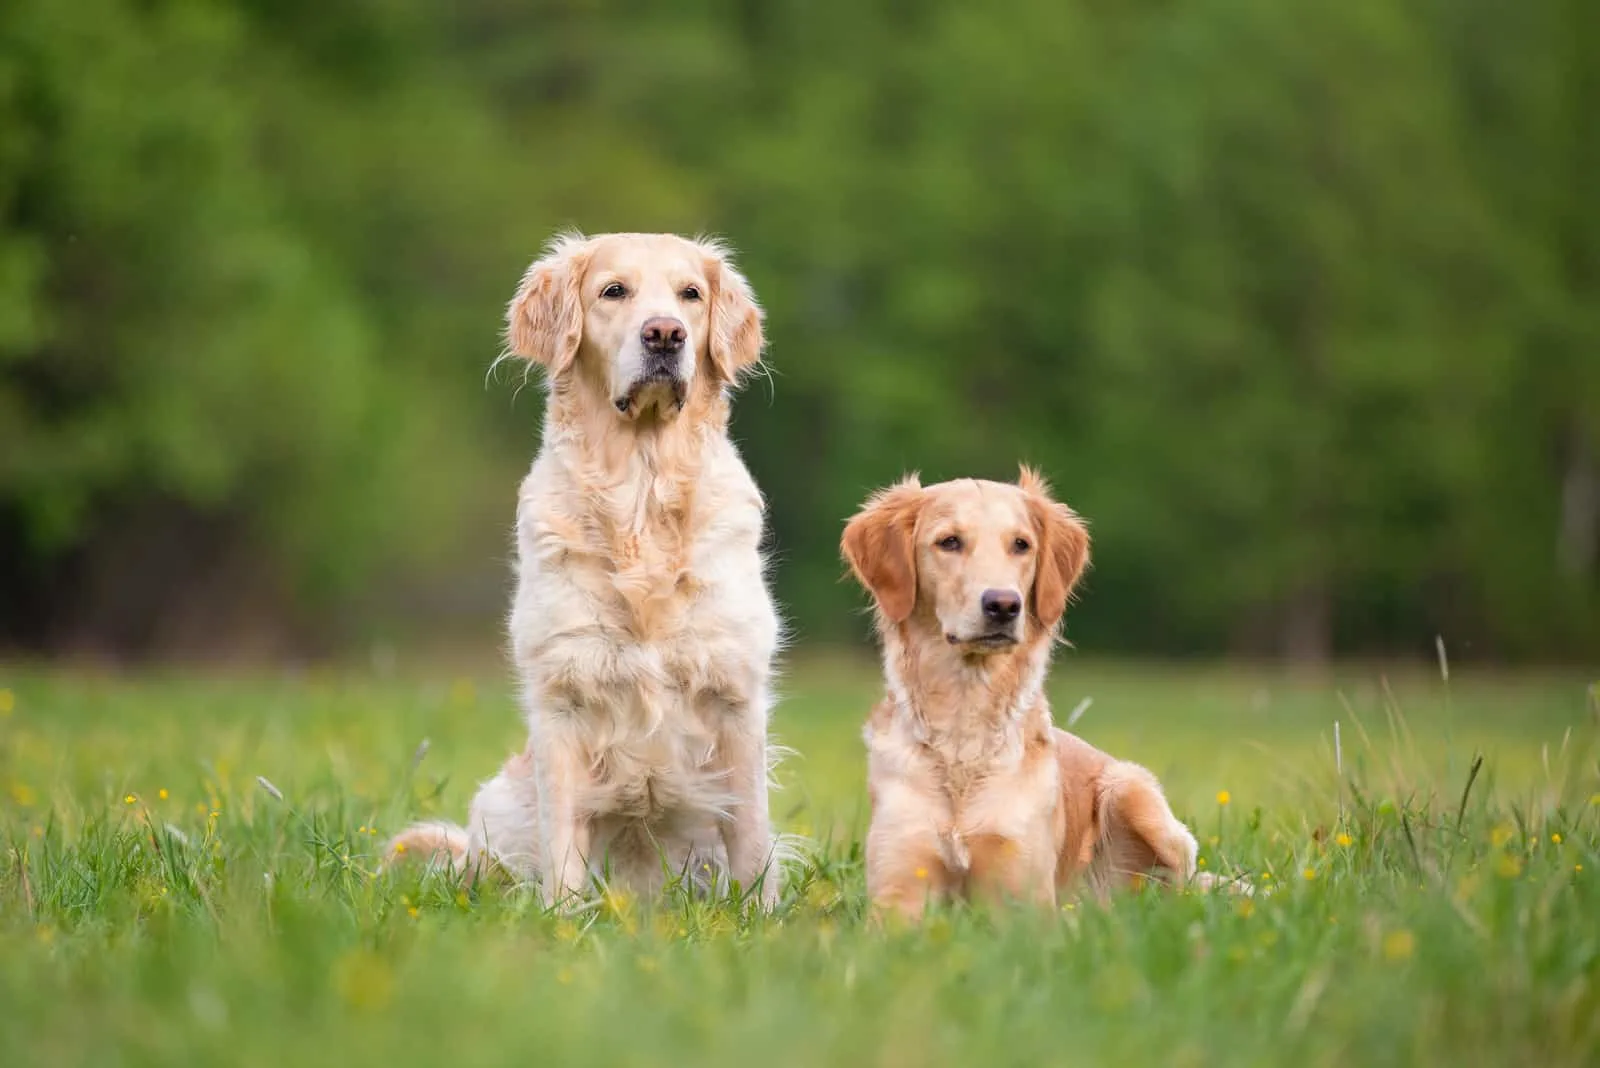 Two golden retrievers are resting in the grass